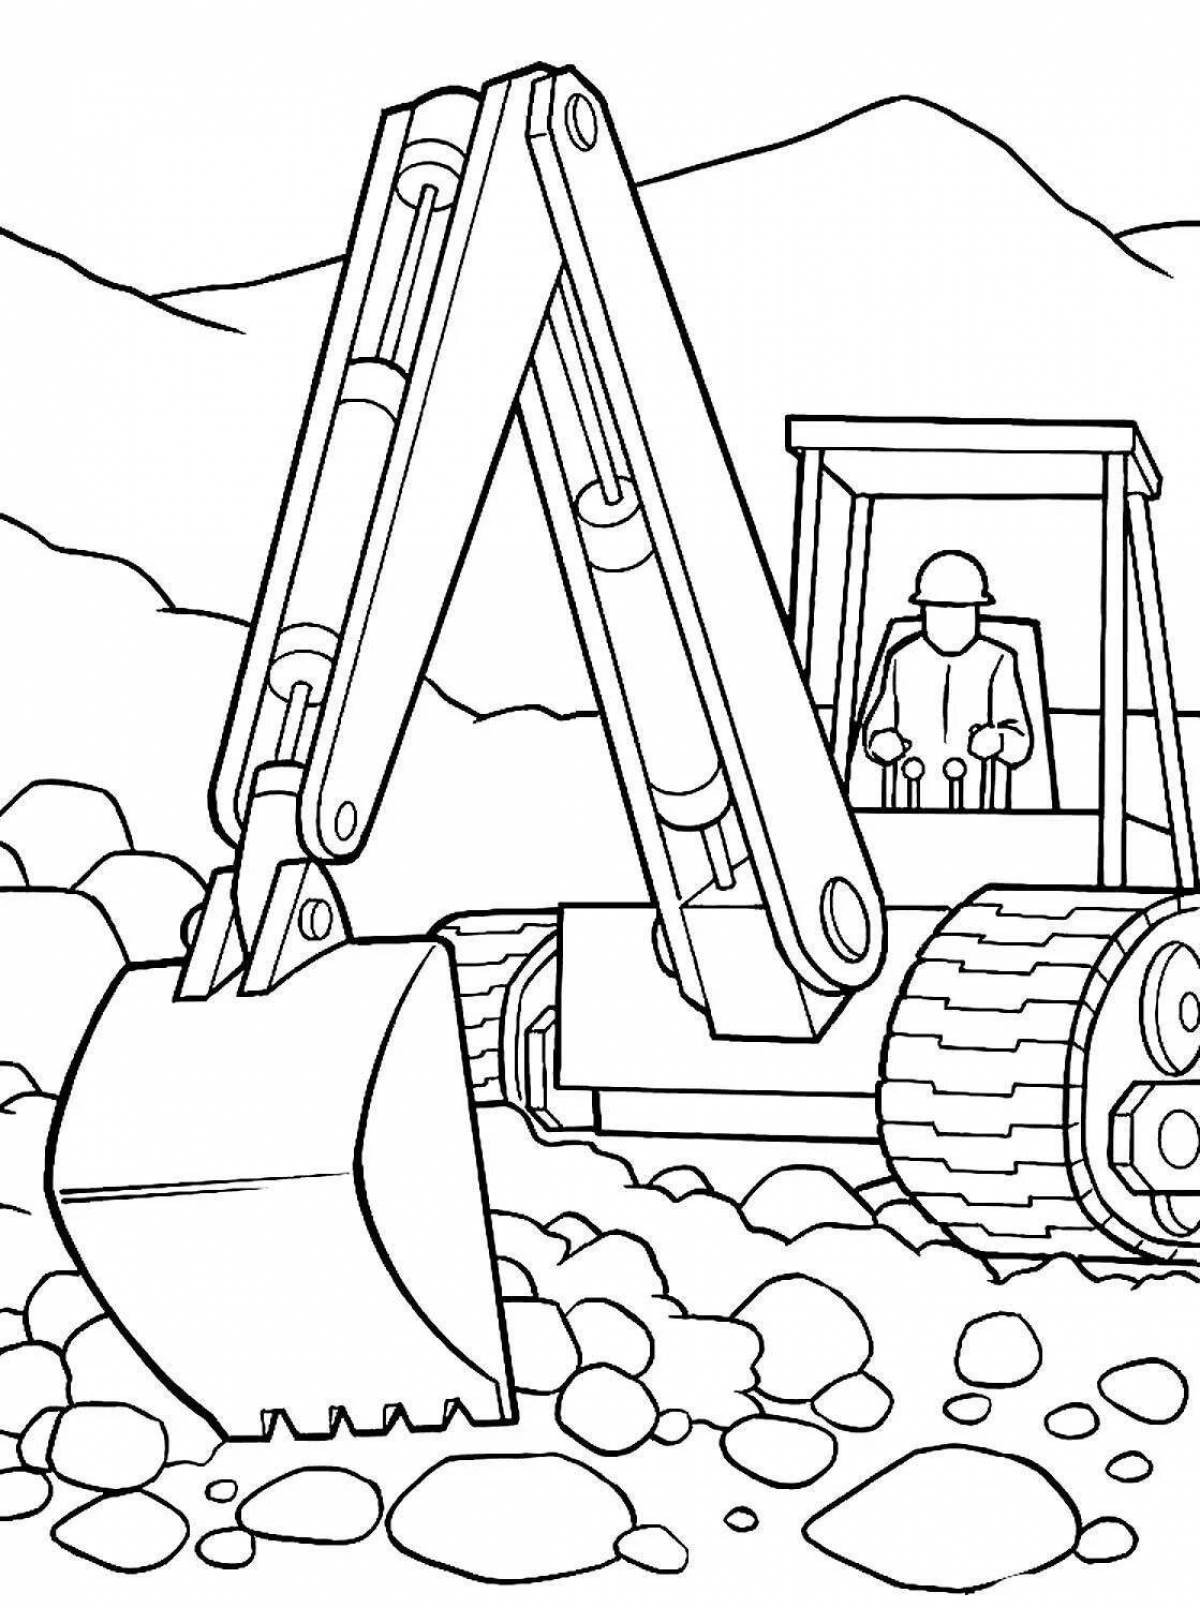 Creative excavator coloring book for kids